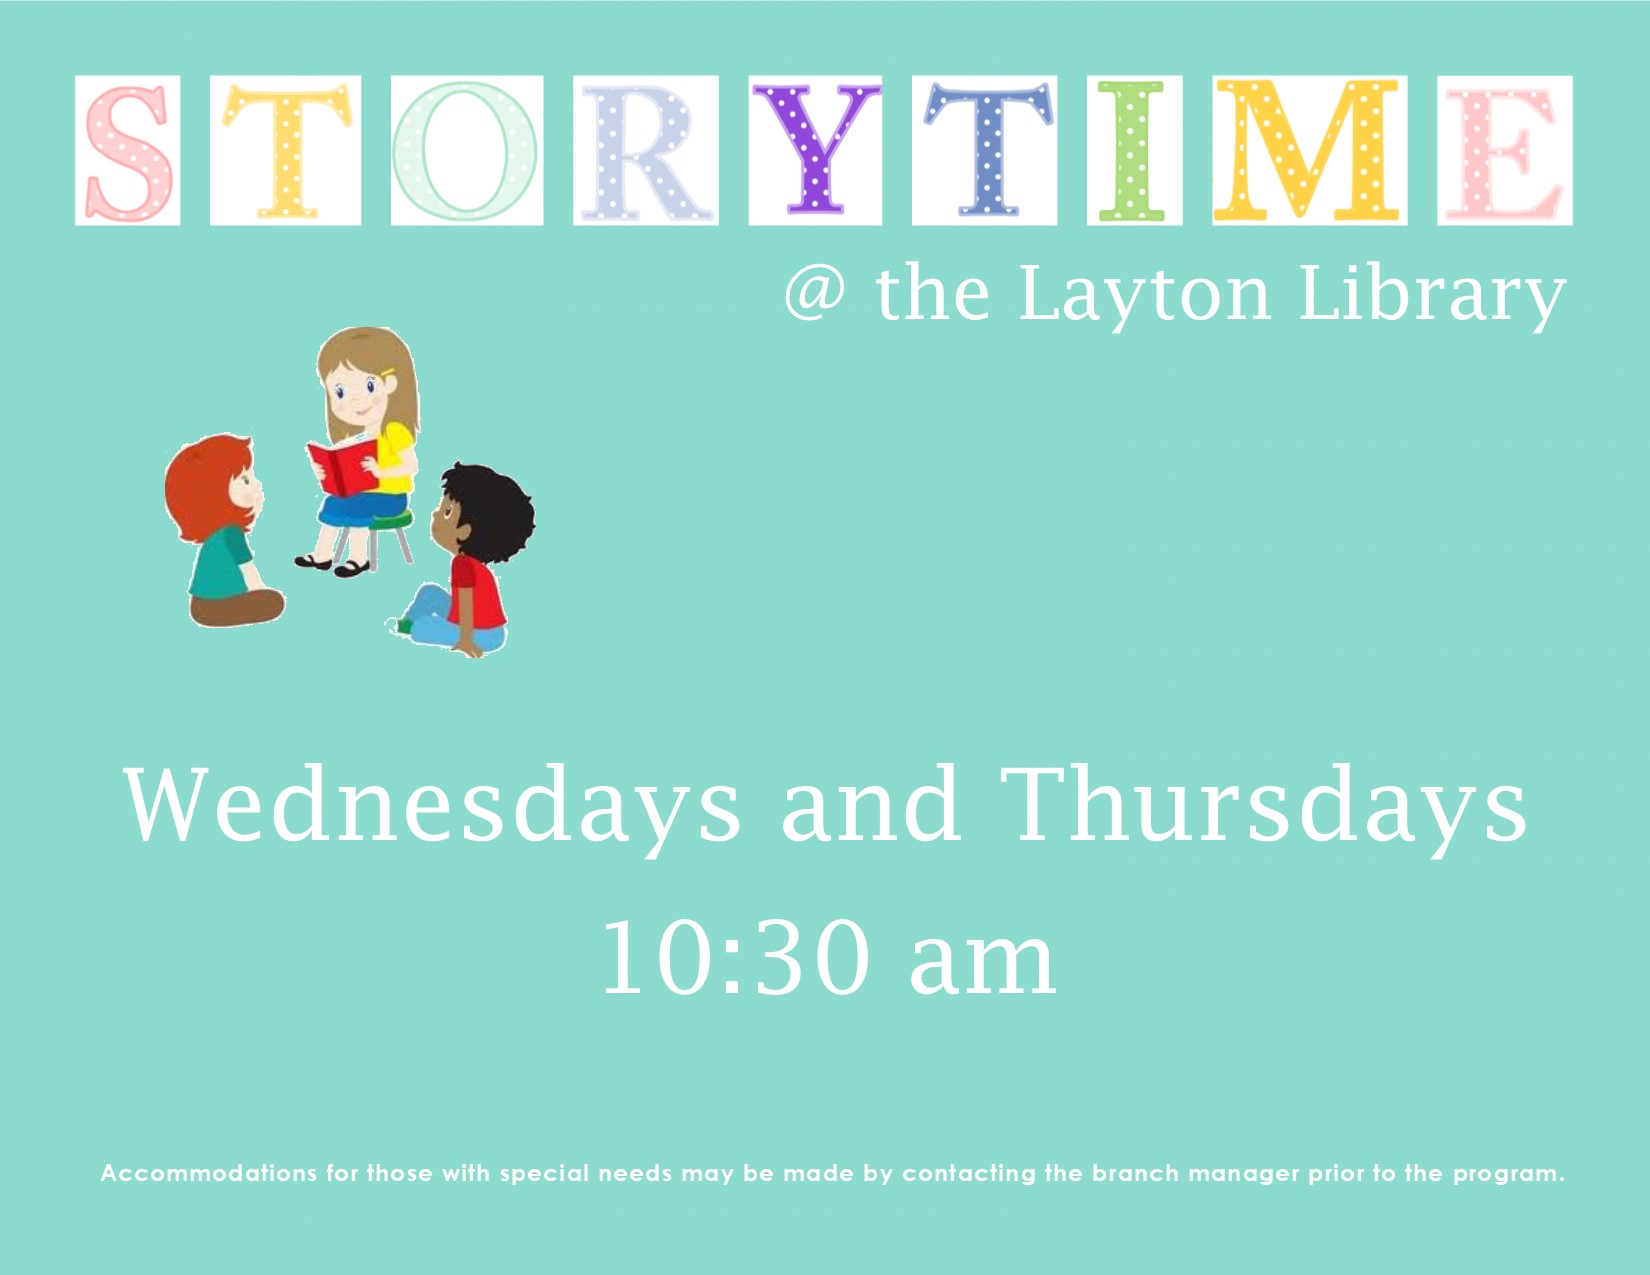 Storytime - Wednesday and Thursday at 10:30 am.